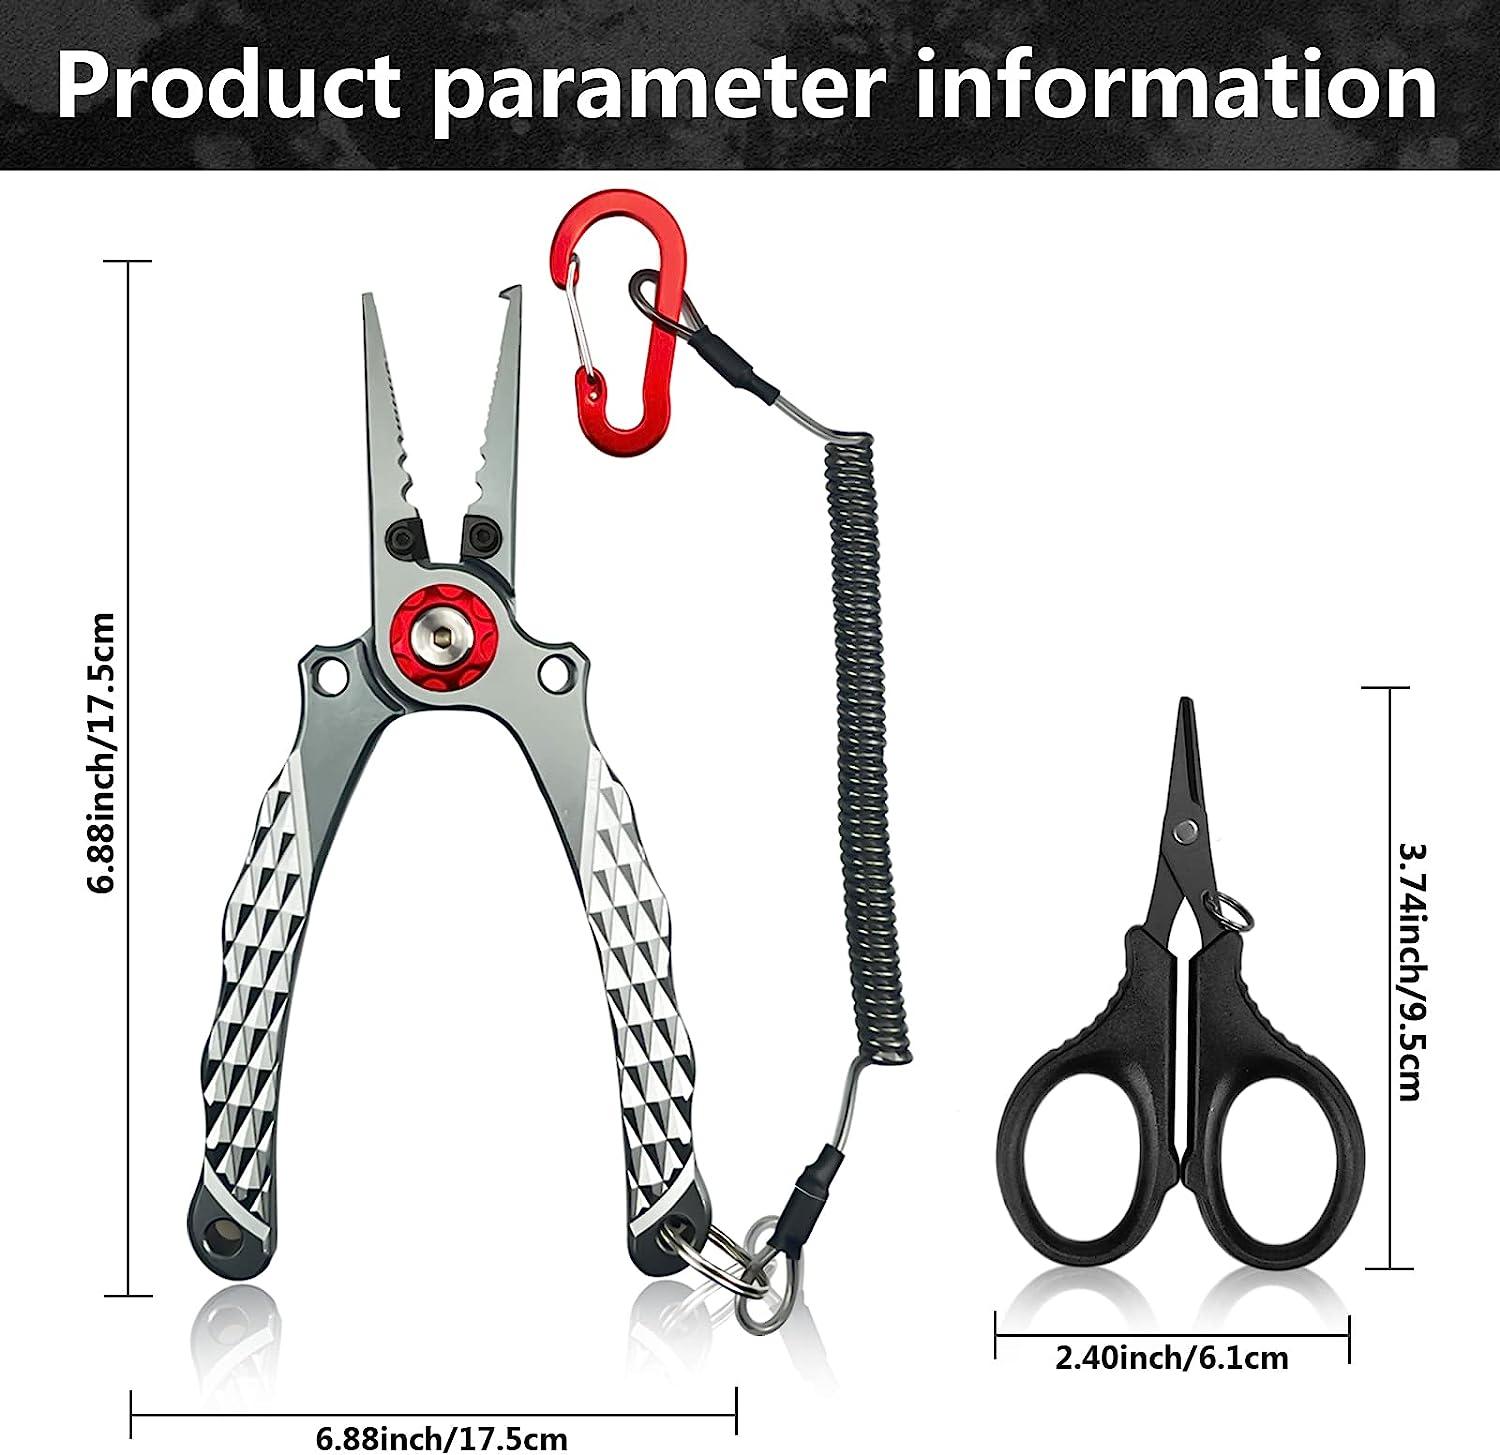 XINBOR Fishing Pliers,420 Stainless Steel Fishing Pliers kit,Fishing Pliers  Saltwater,Multi-Function Split Ring Pliers for Fishing with Sheath and  Lanyard,Braid Line Cutter,Ice Fishing Tools